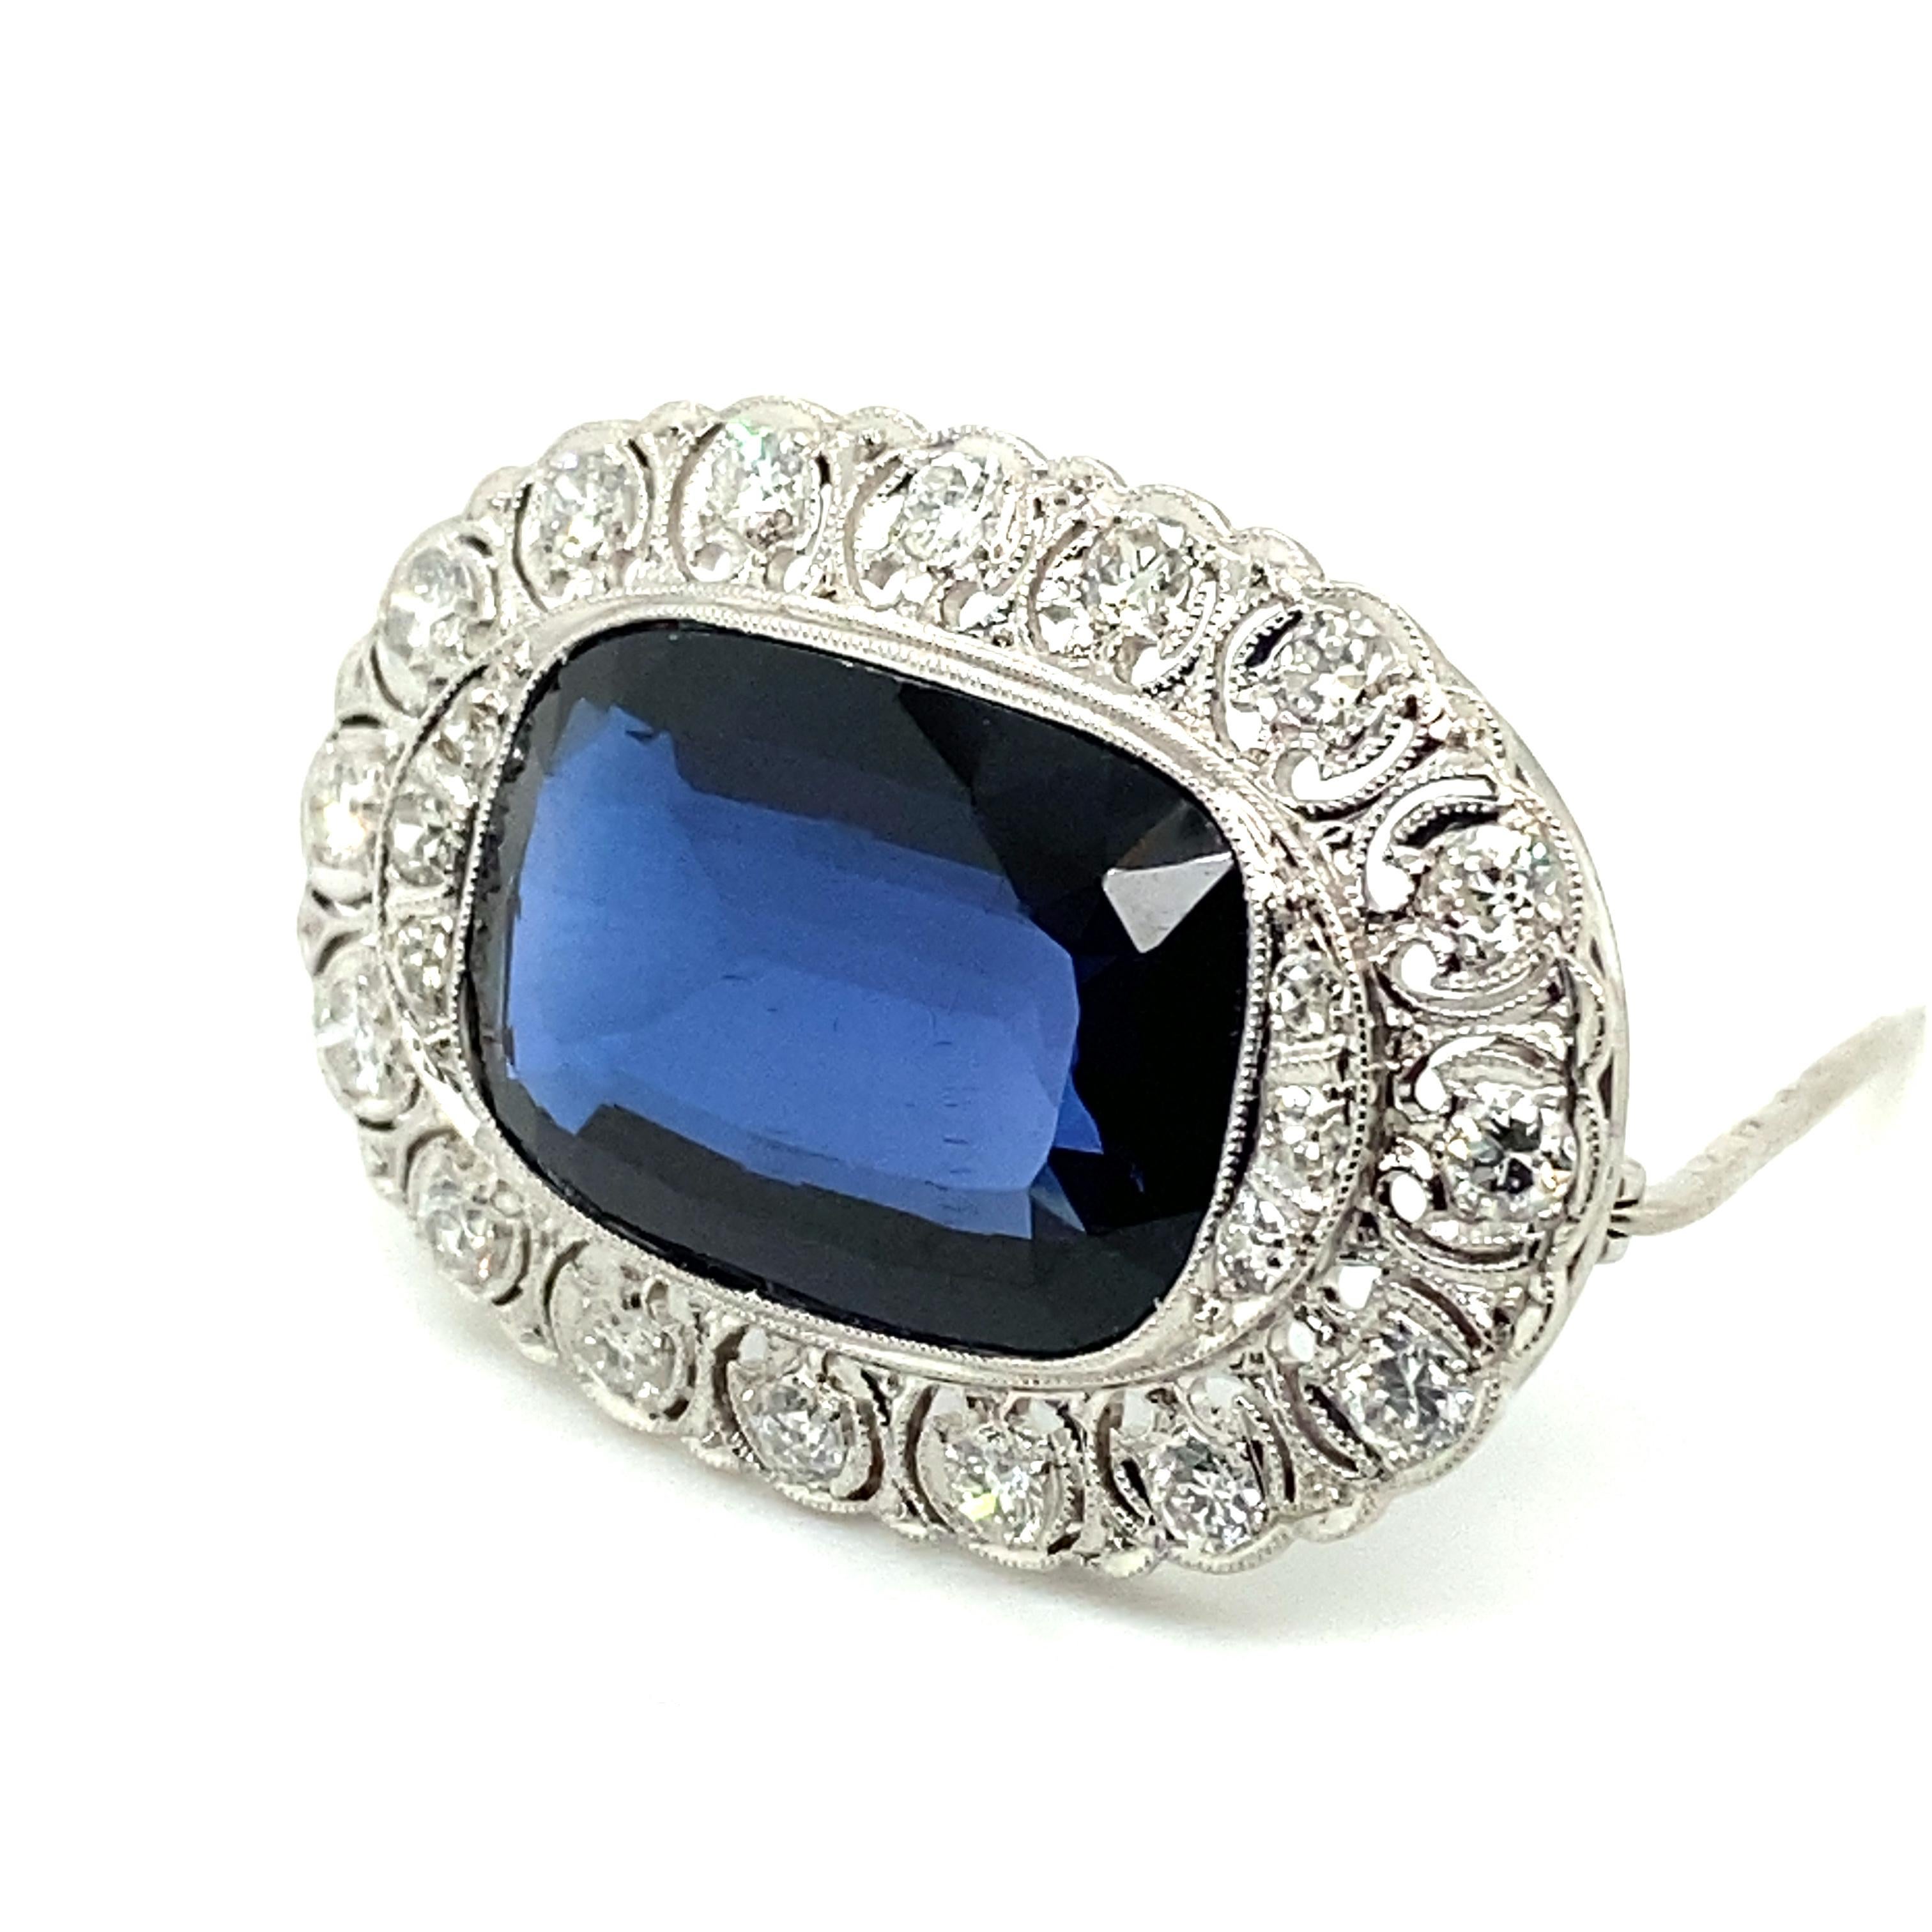 Edwardian Diamond and Synthetic Sapphire Brooch in 14 Karat White Gold